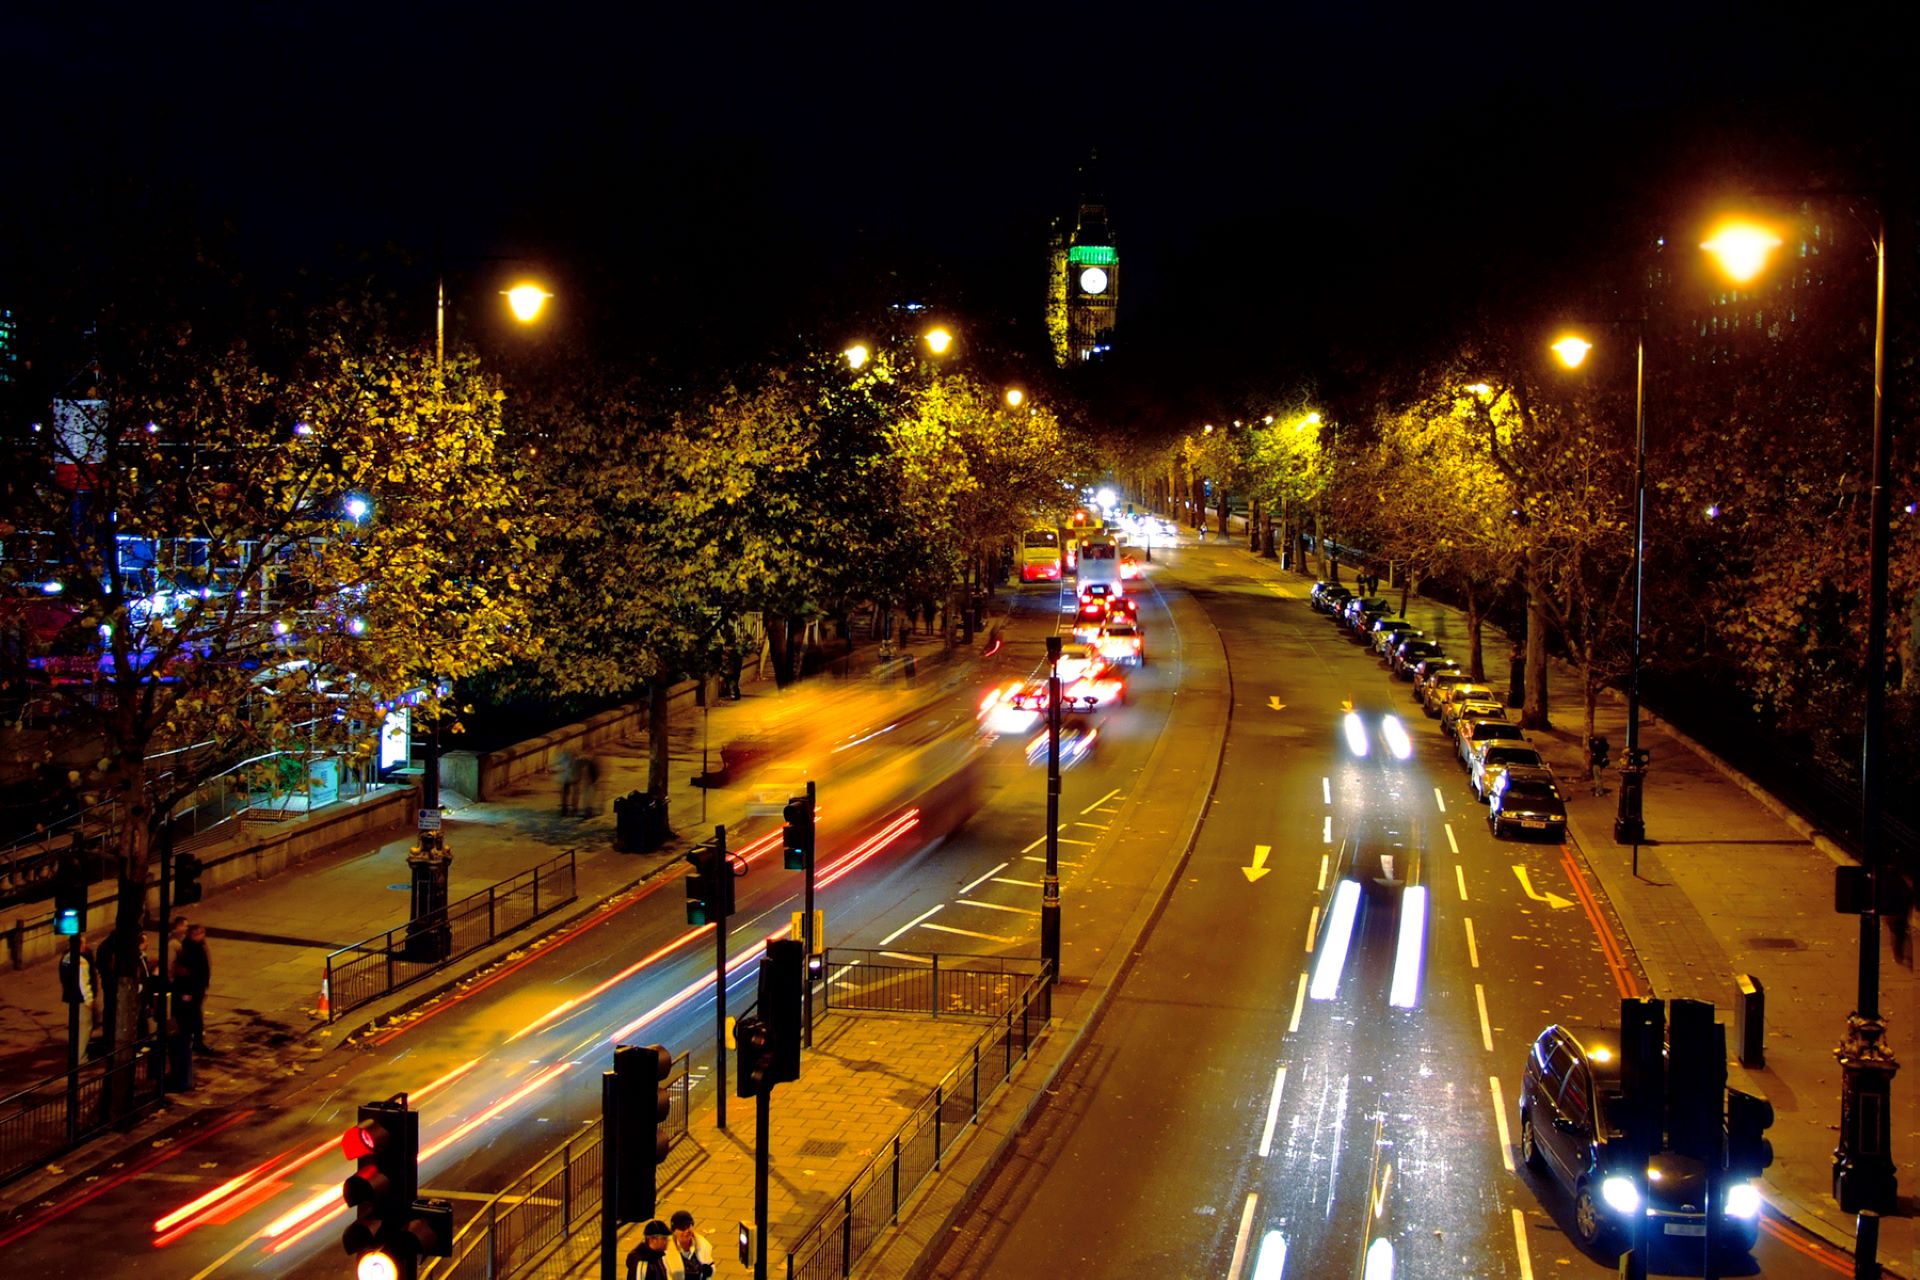 A view of the traffic in Westminster at night time.